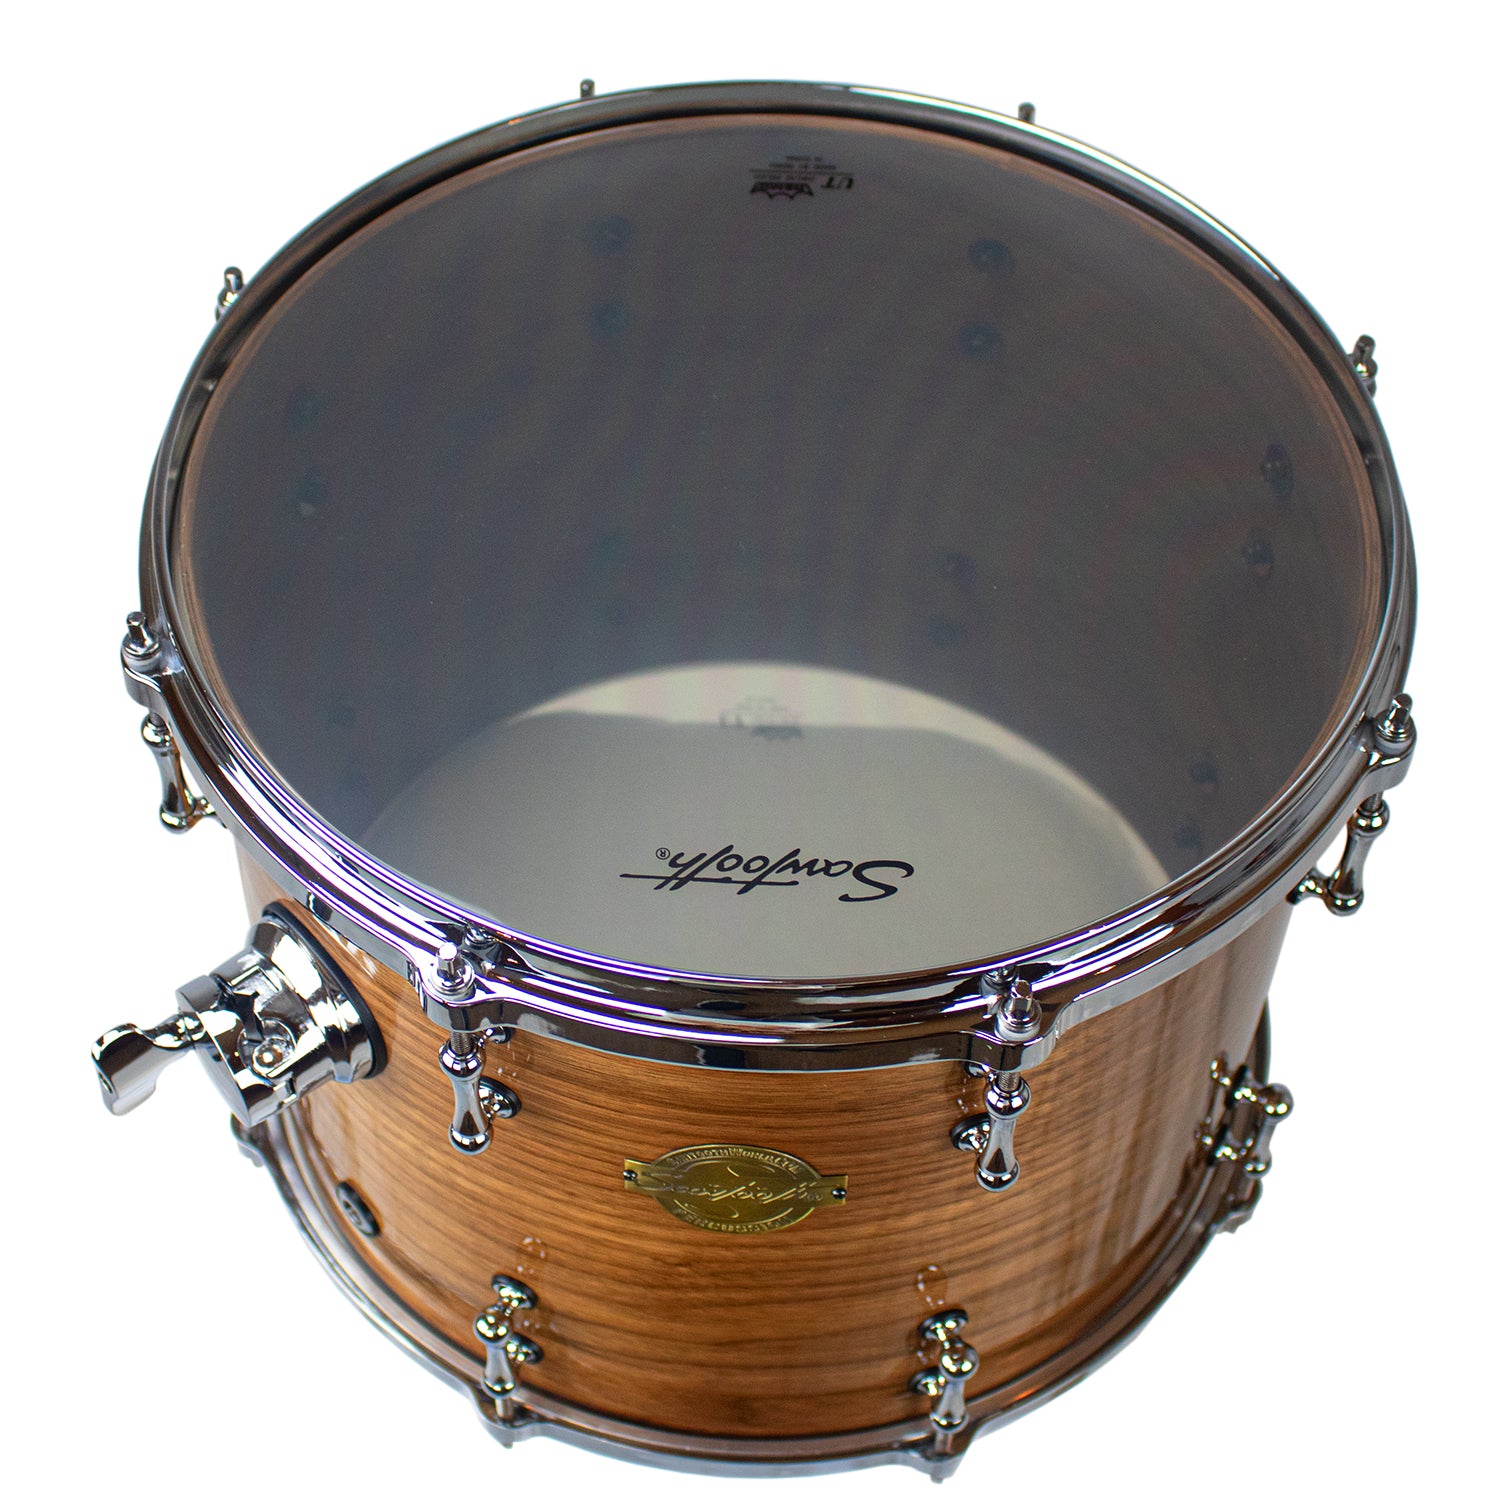 Sawtooth Hickory Natural Wood 14 x 6.5 Snare Drum